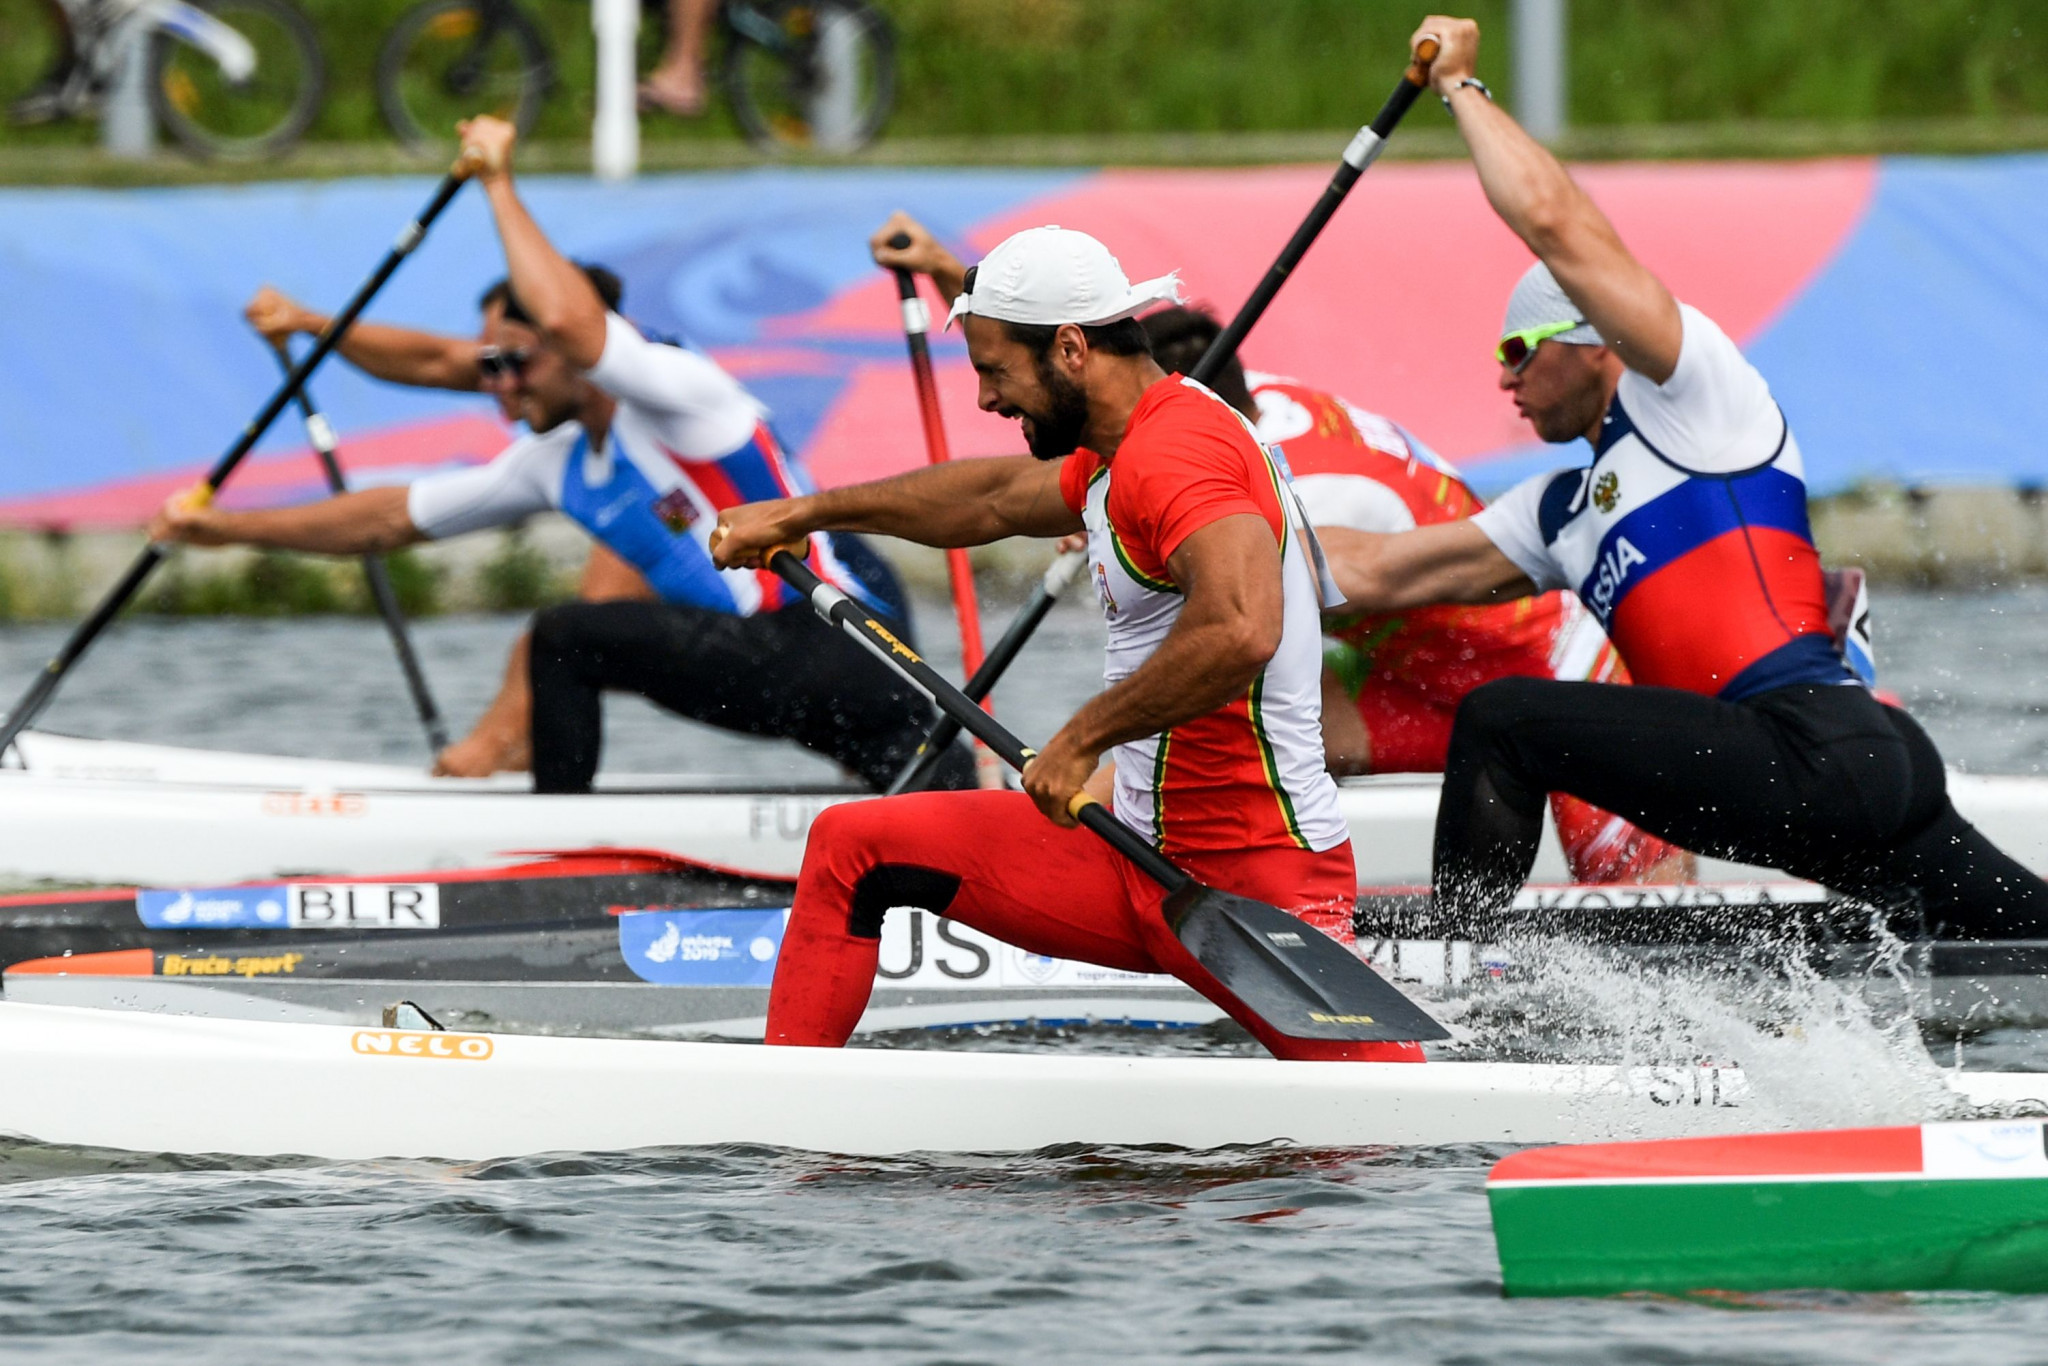 The first medals in the canoe sprint competition at Zaslavl Regatta Course were also up for grabs ©Getty Images